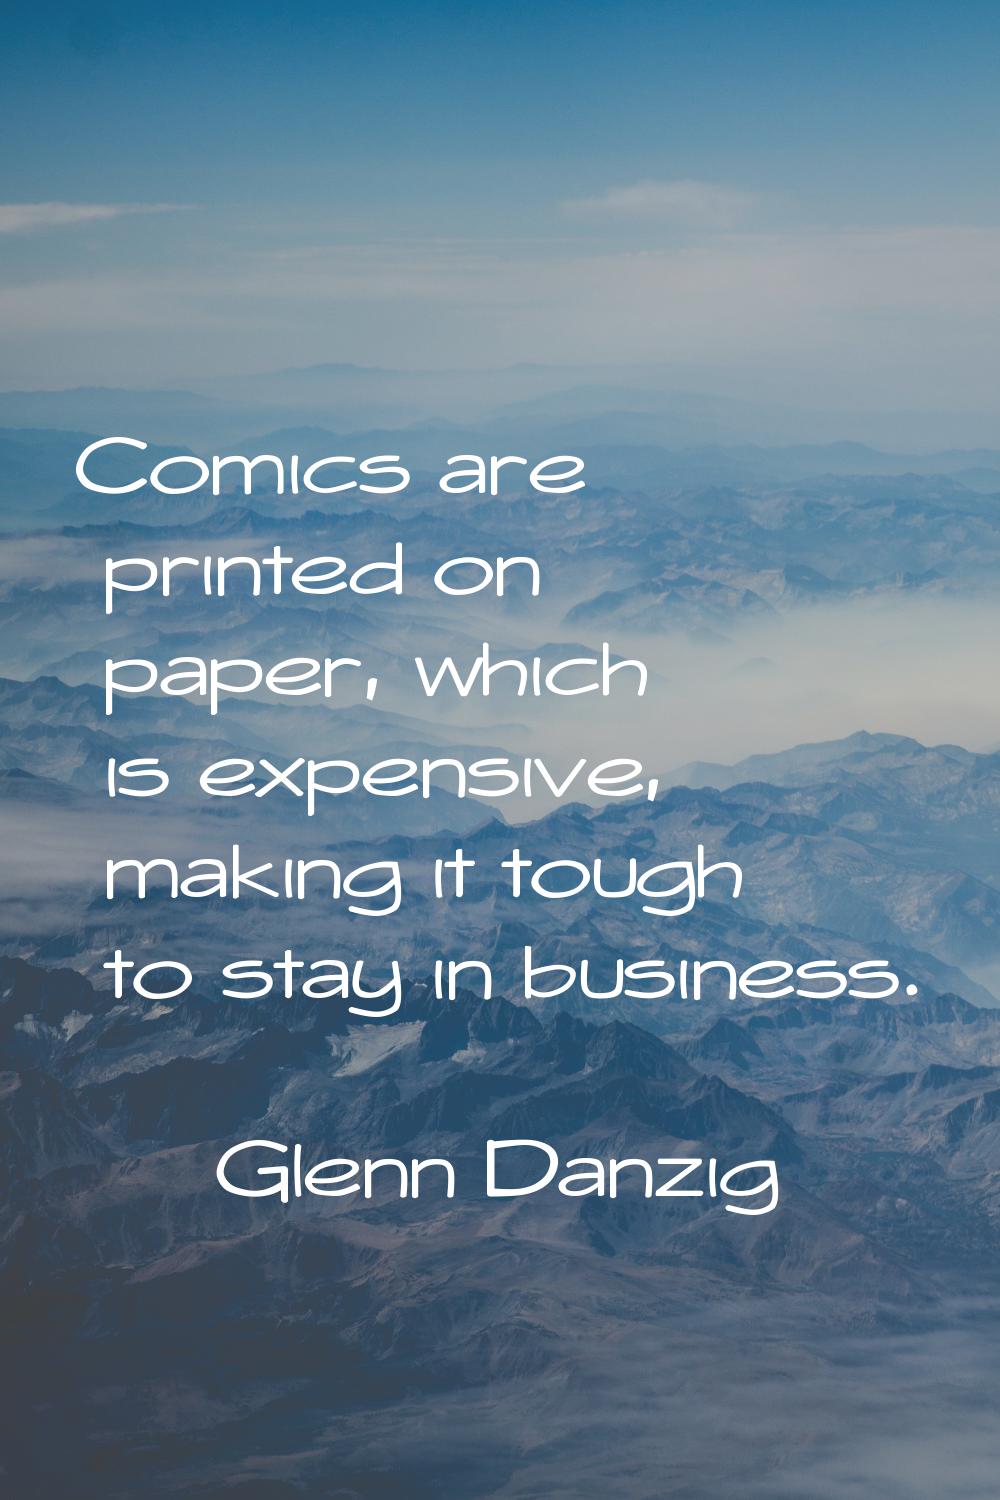 Comics are printed on paper, which is expensive, making it tough to stay in business.